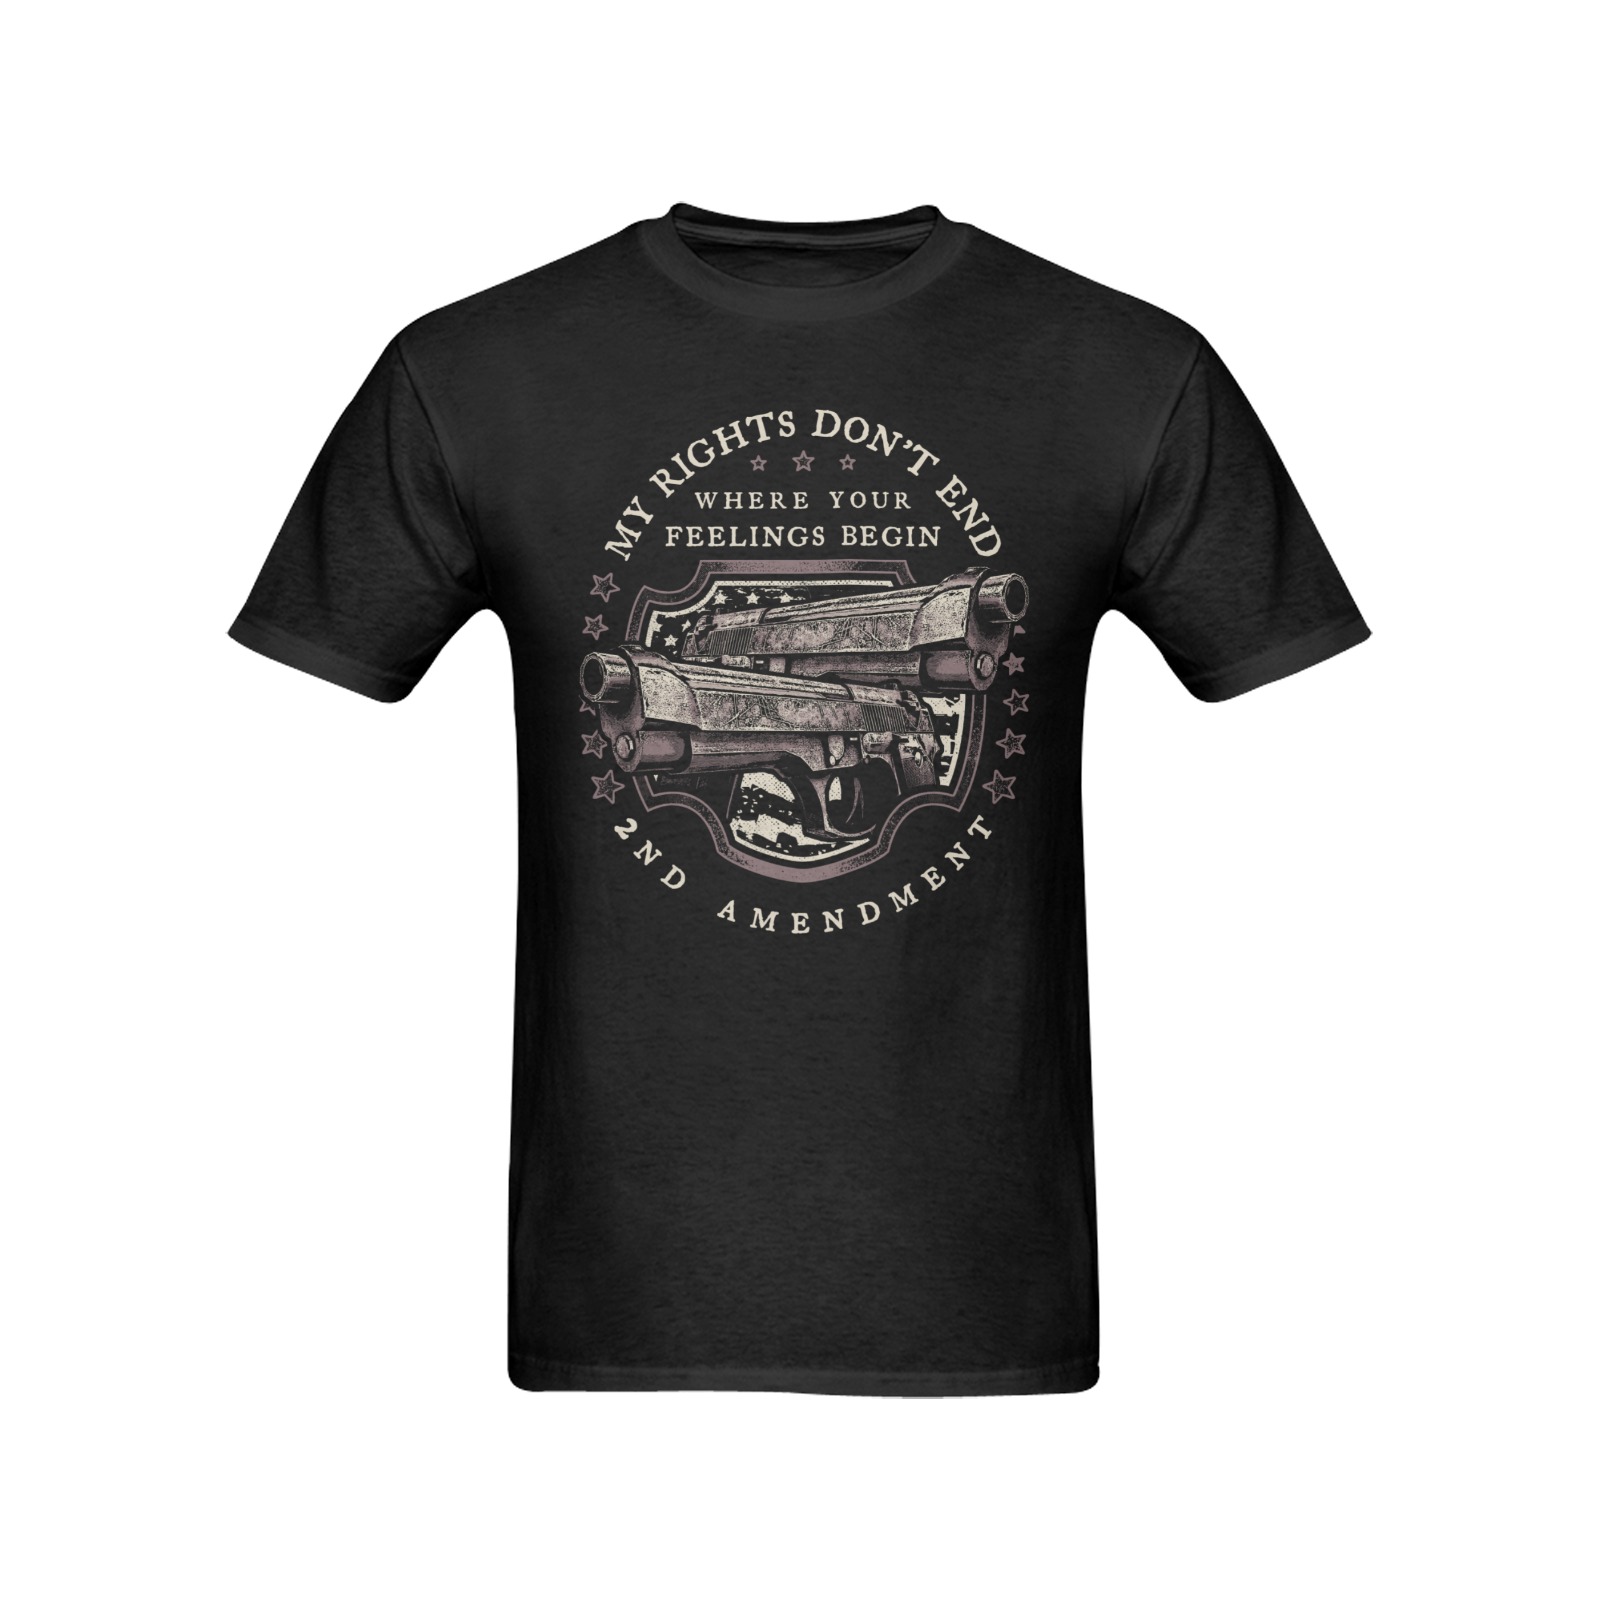 “My Rights Don’t End Where Your Feelings Begin” – Men’s T-Shirt | Black